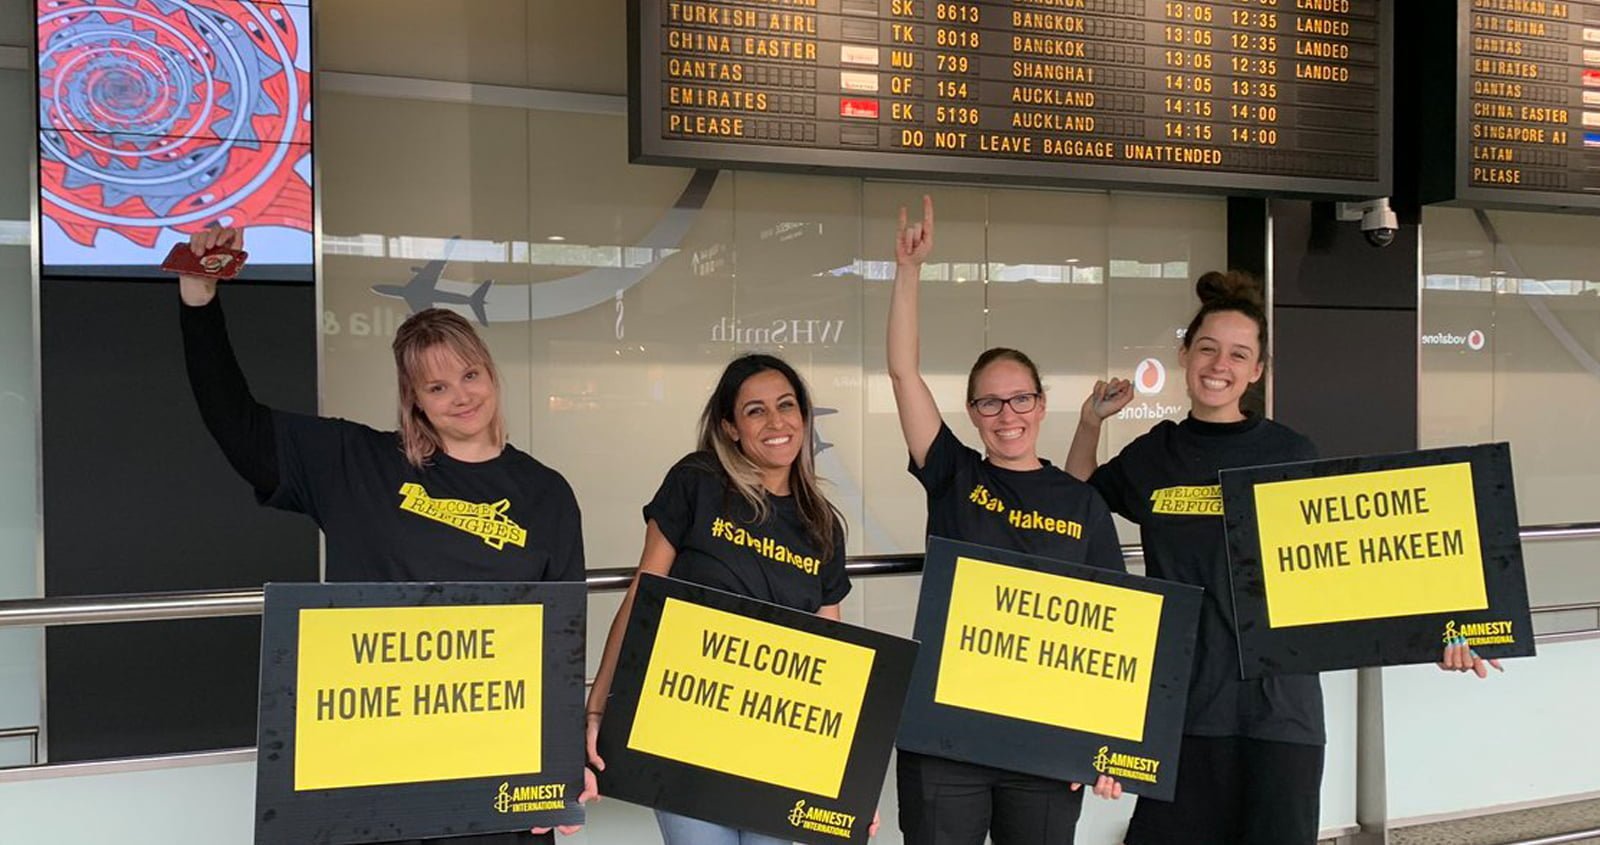 a group of supporters wearing #SaveHakeem shirts and holding 'welcome home Hakeem' signs under a flight arrivals board